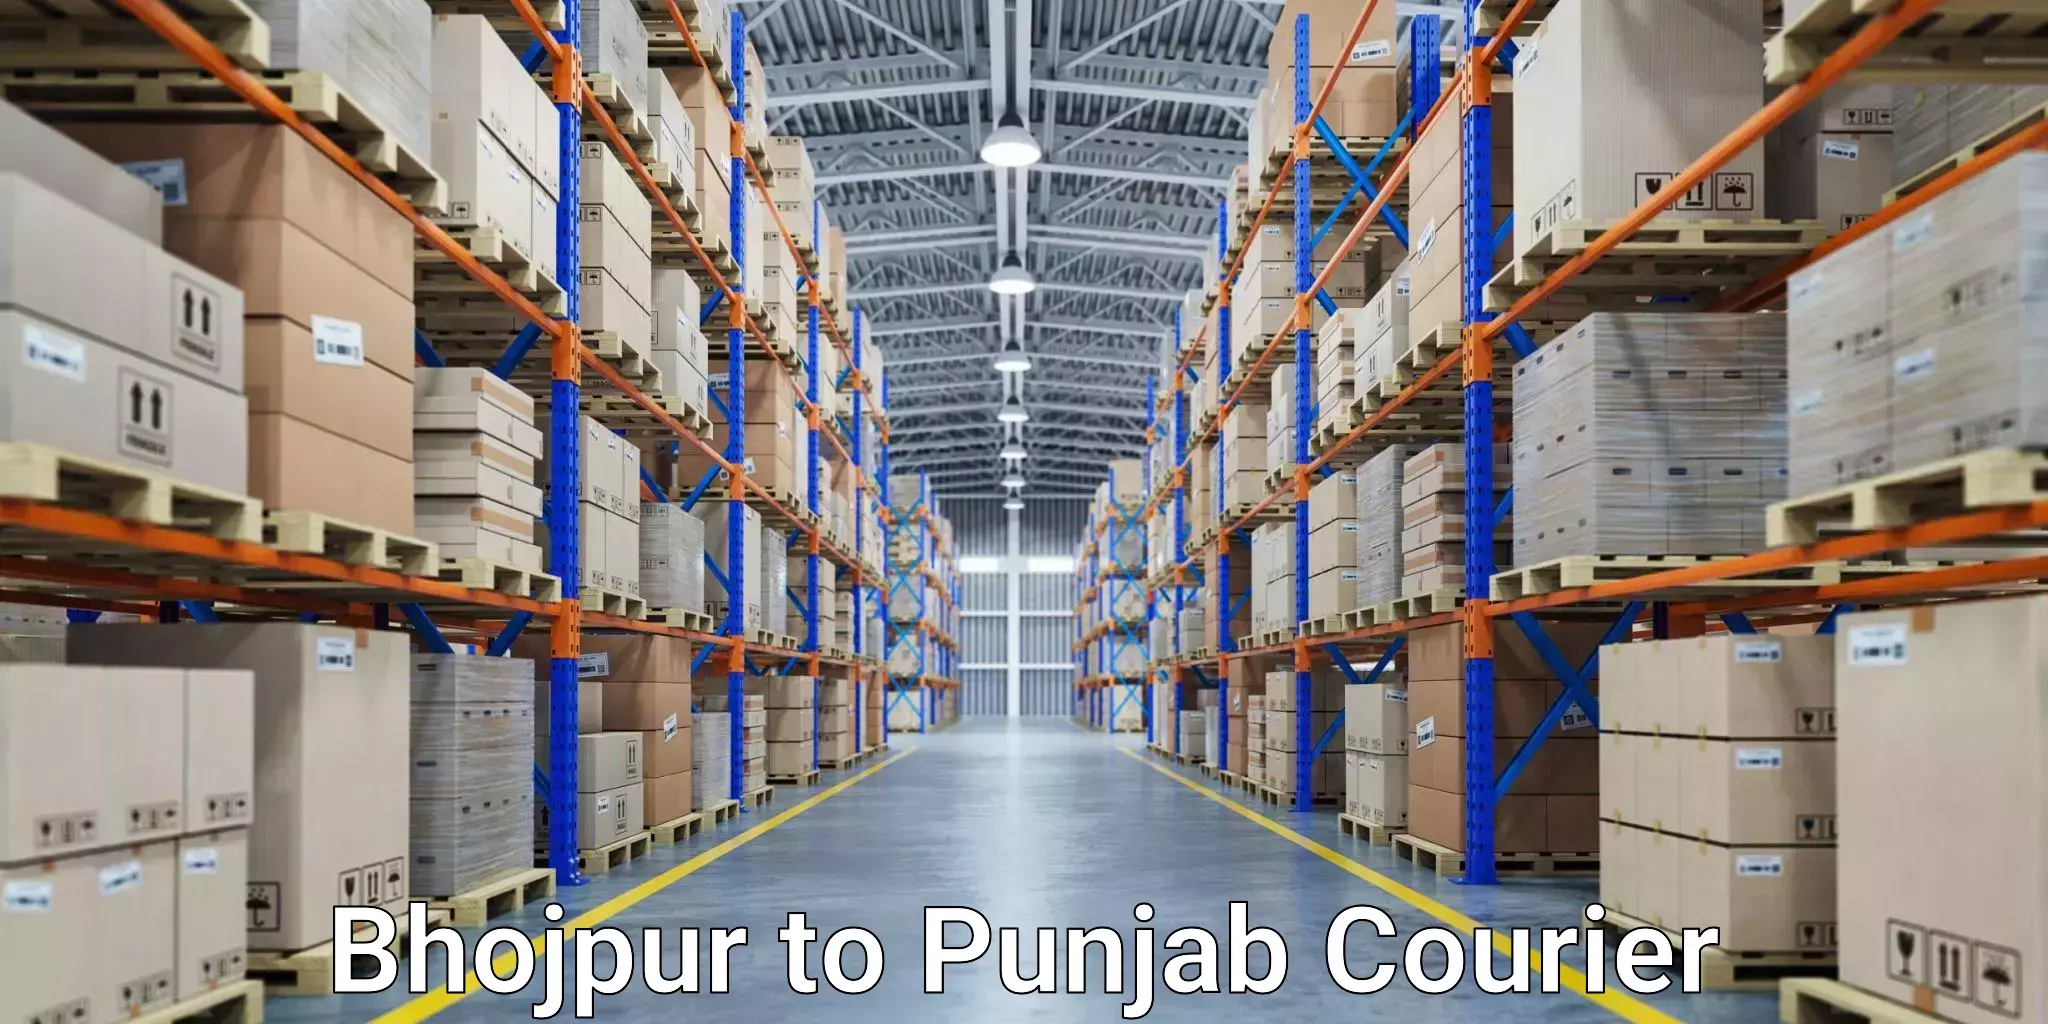 Streamlined delivery processes Bhojpur to Punjab